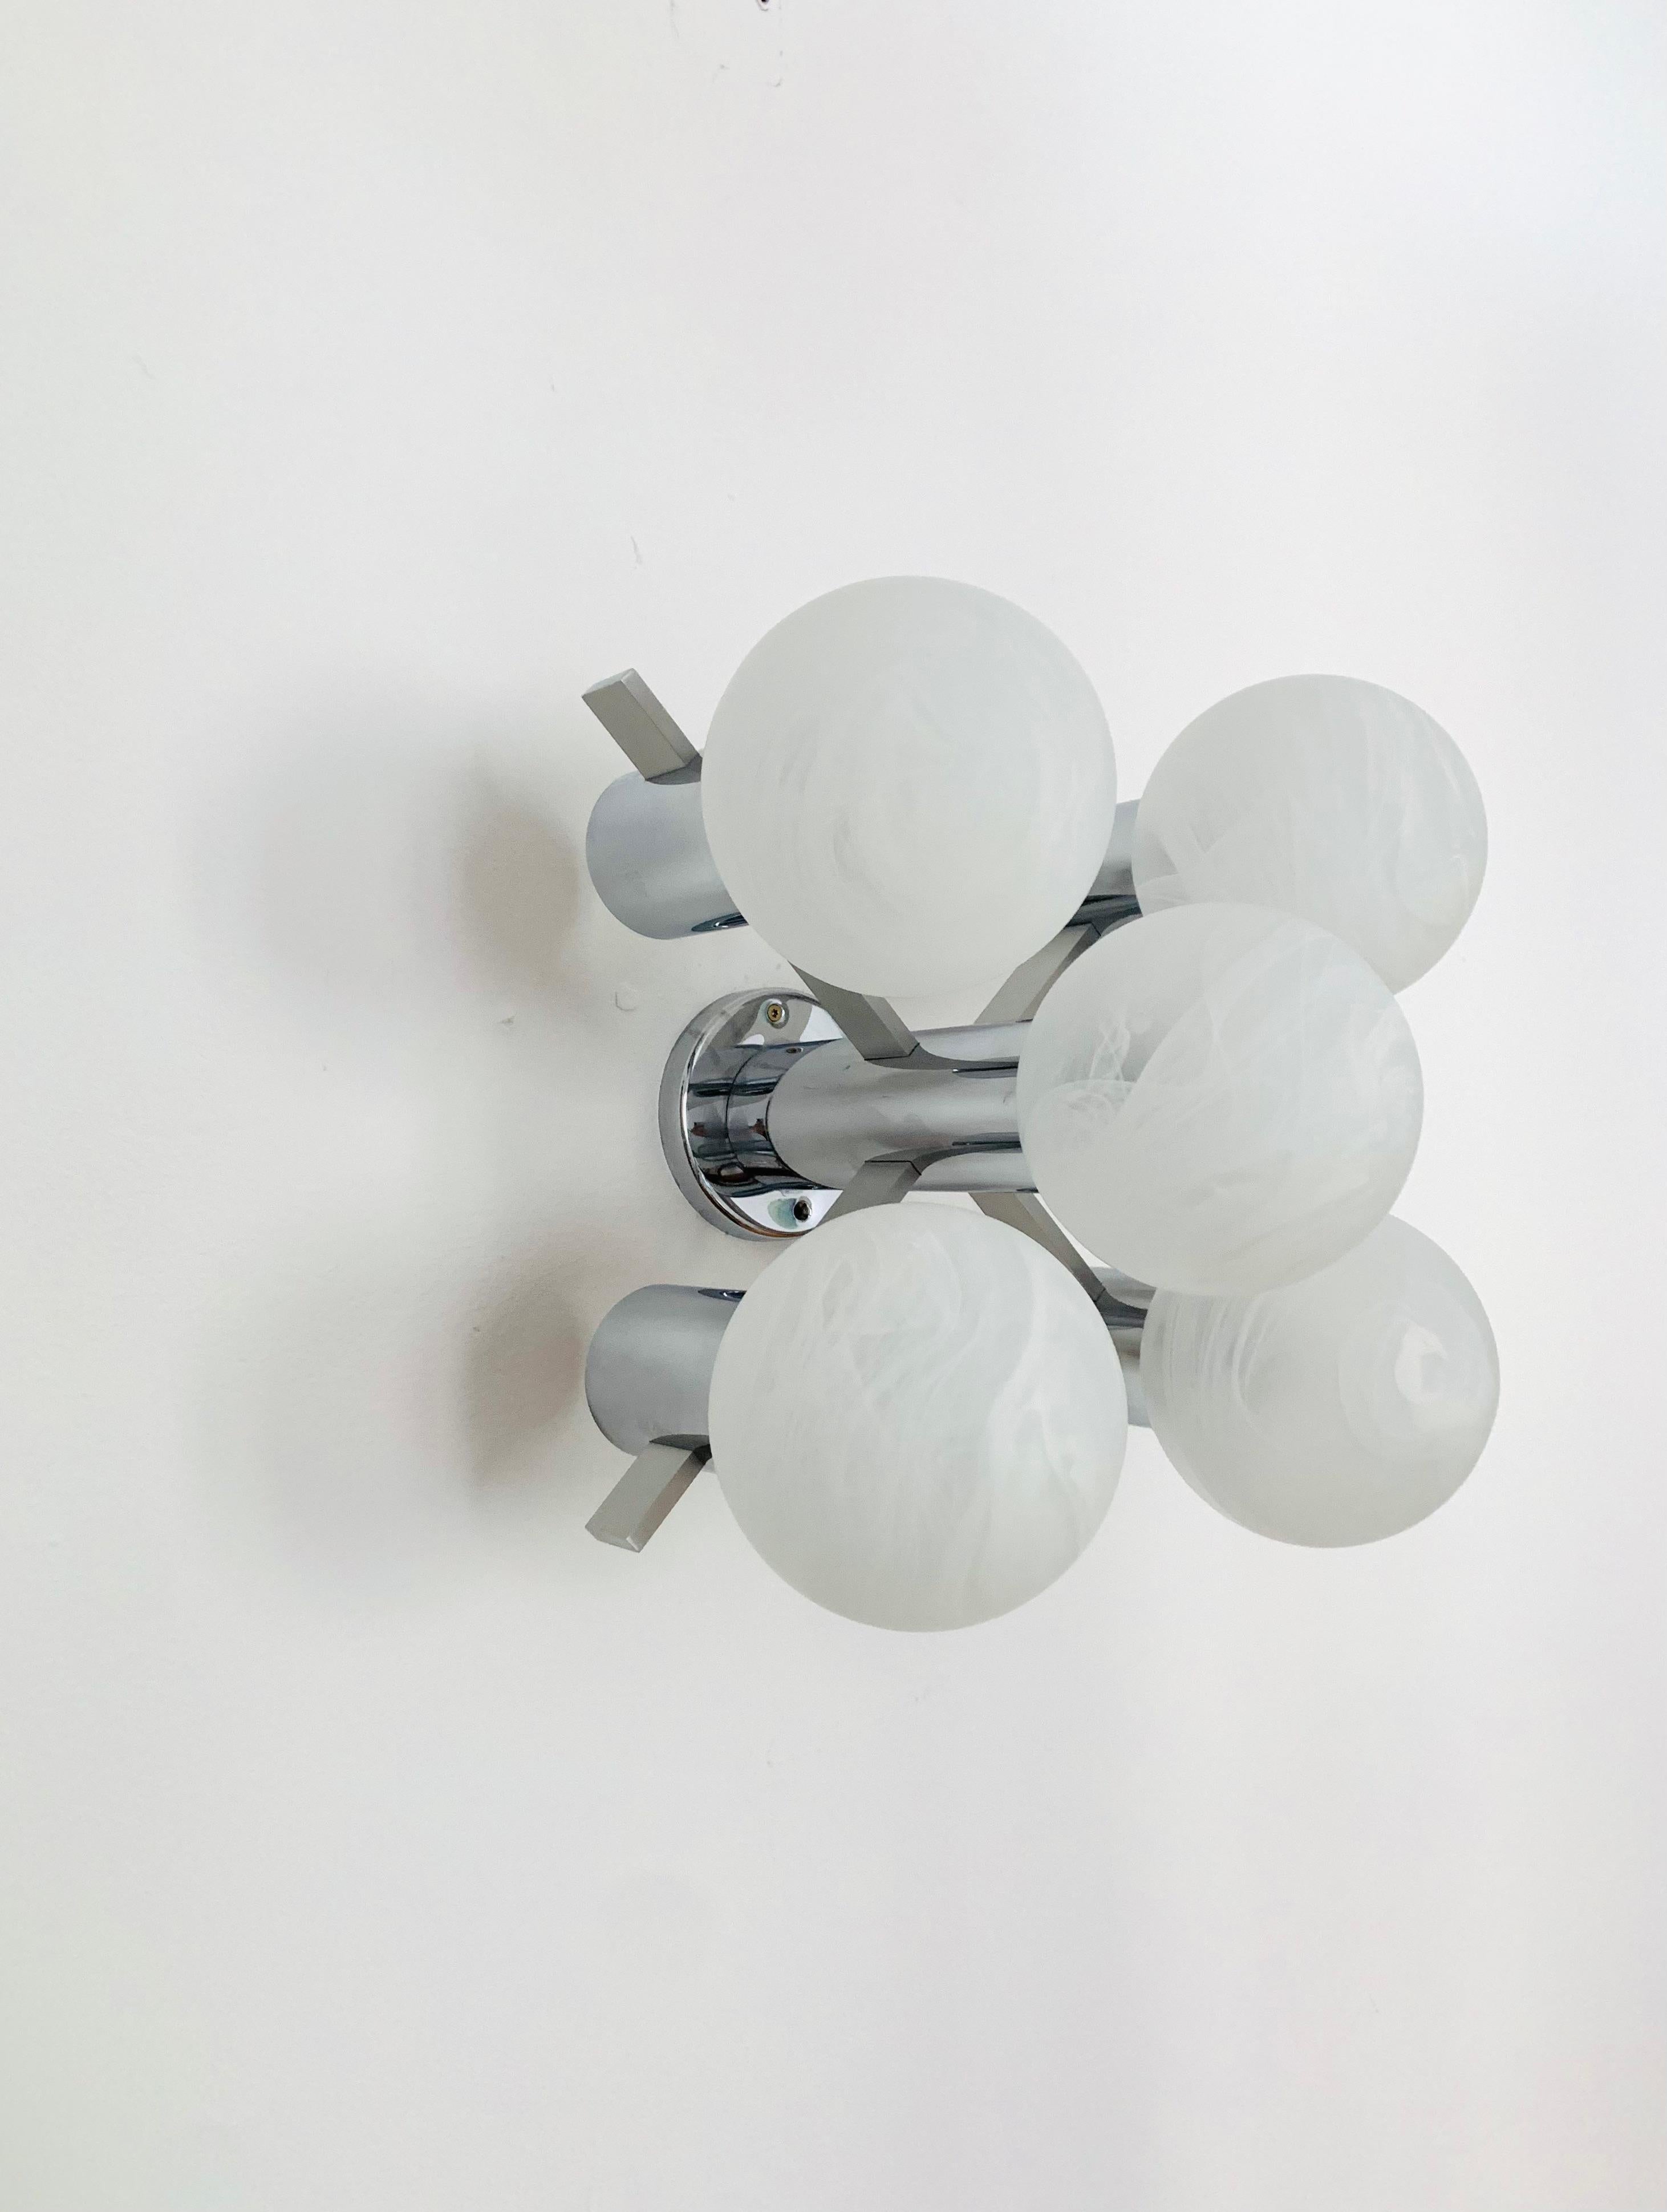 Beautiful Sputnik ceiling lamp from the 1960s.
Very high quality workmanship and fantastic design.
The special glass creates a pleasant light.
Rare version in silver.

Condition:

Very good vintage condition with slight signs of wear